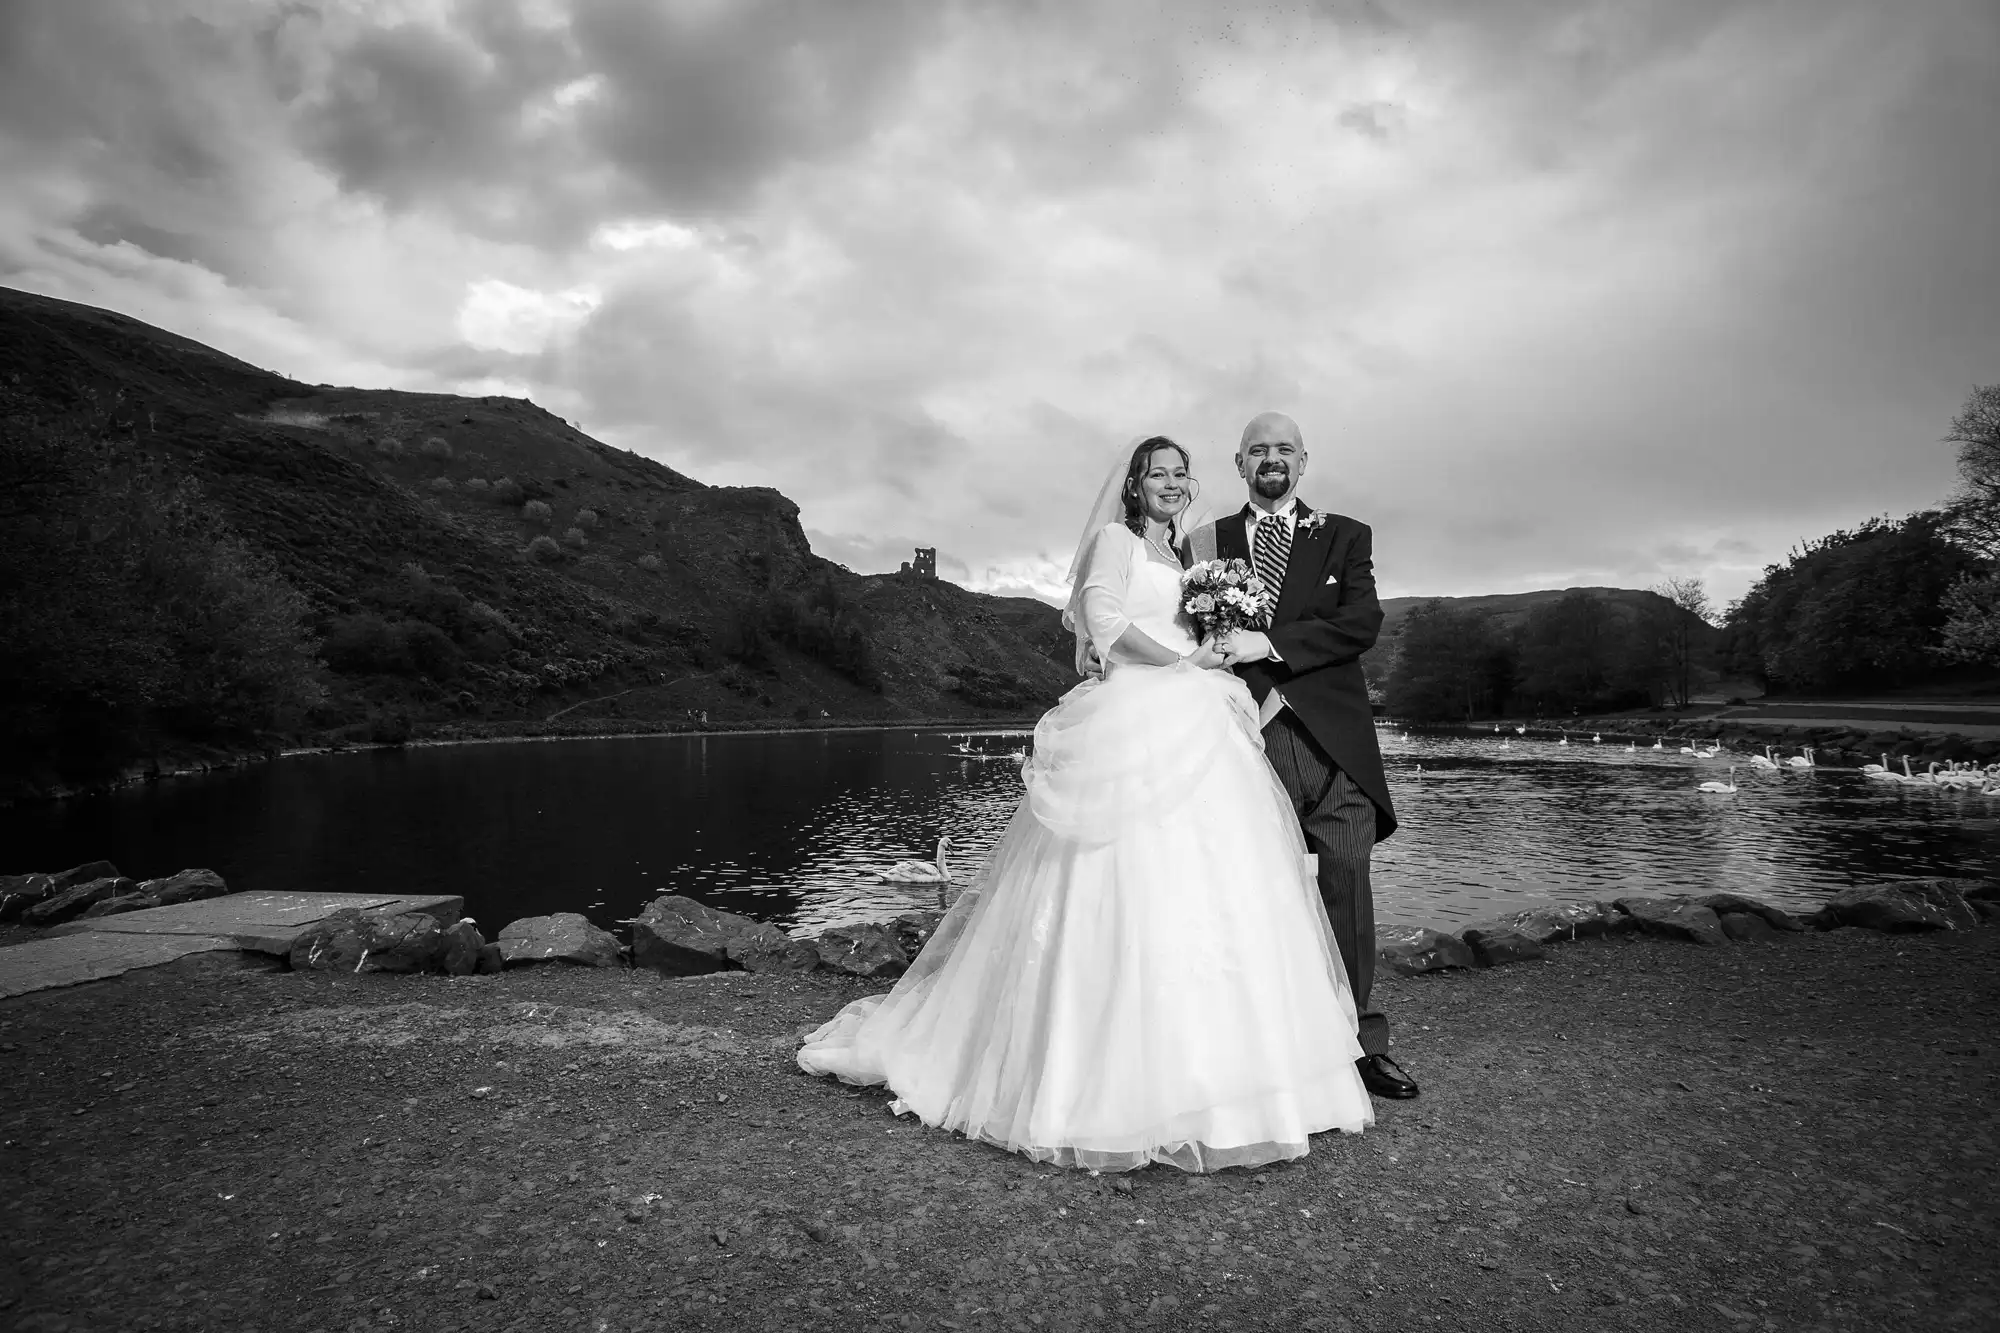 A bride and groom smiling along a lakeside, with rolling hills in the background under a cloudy sky, in a black and white photo.